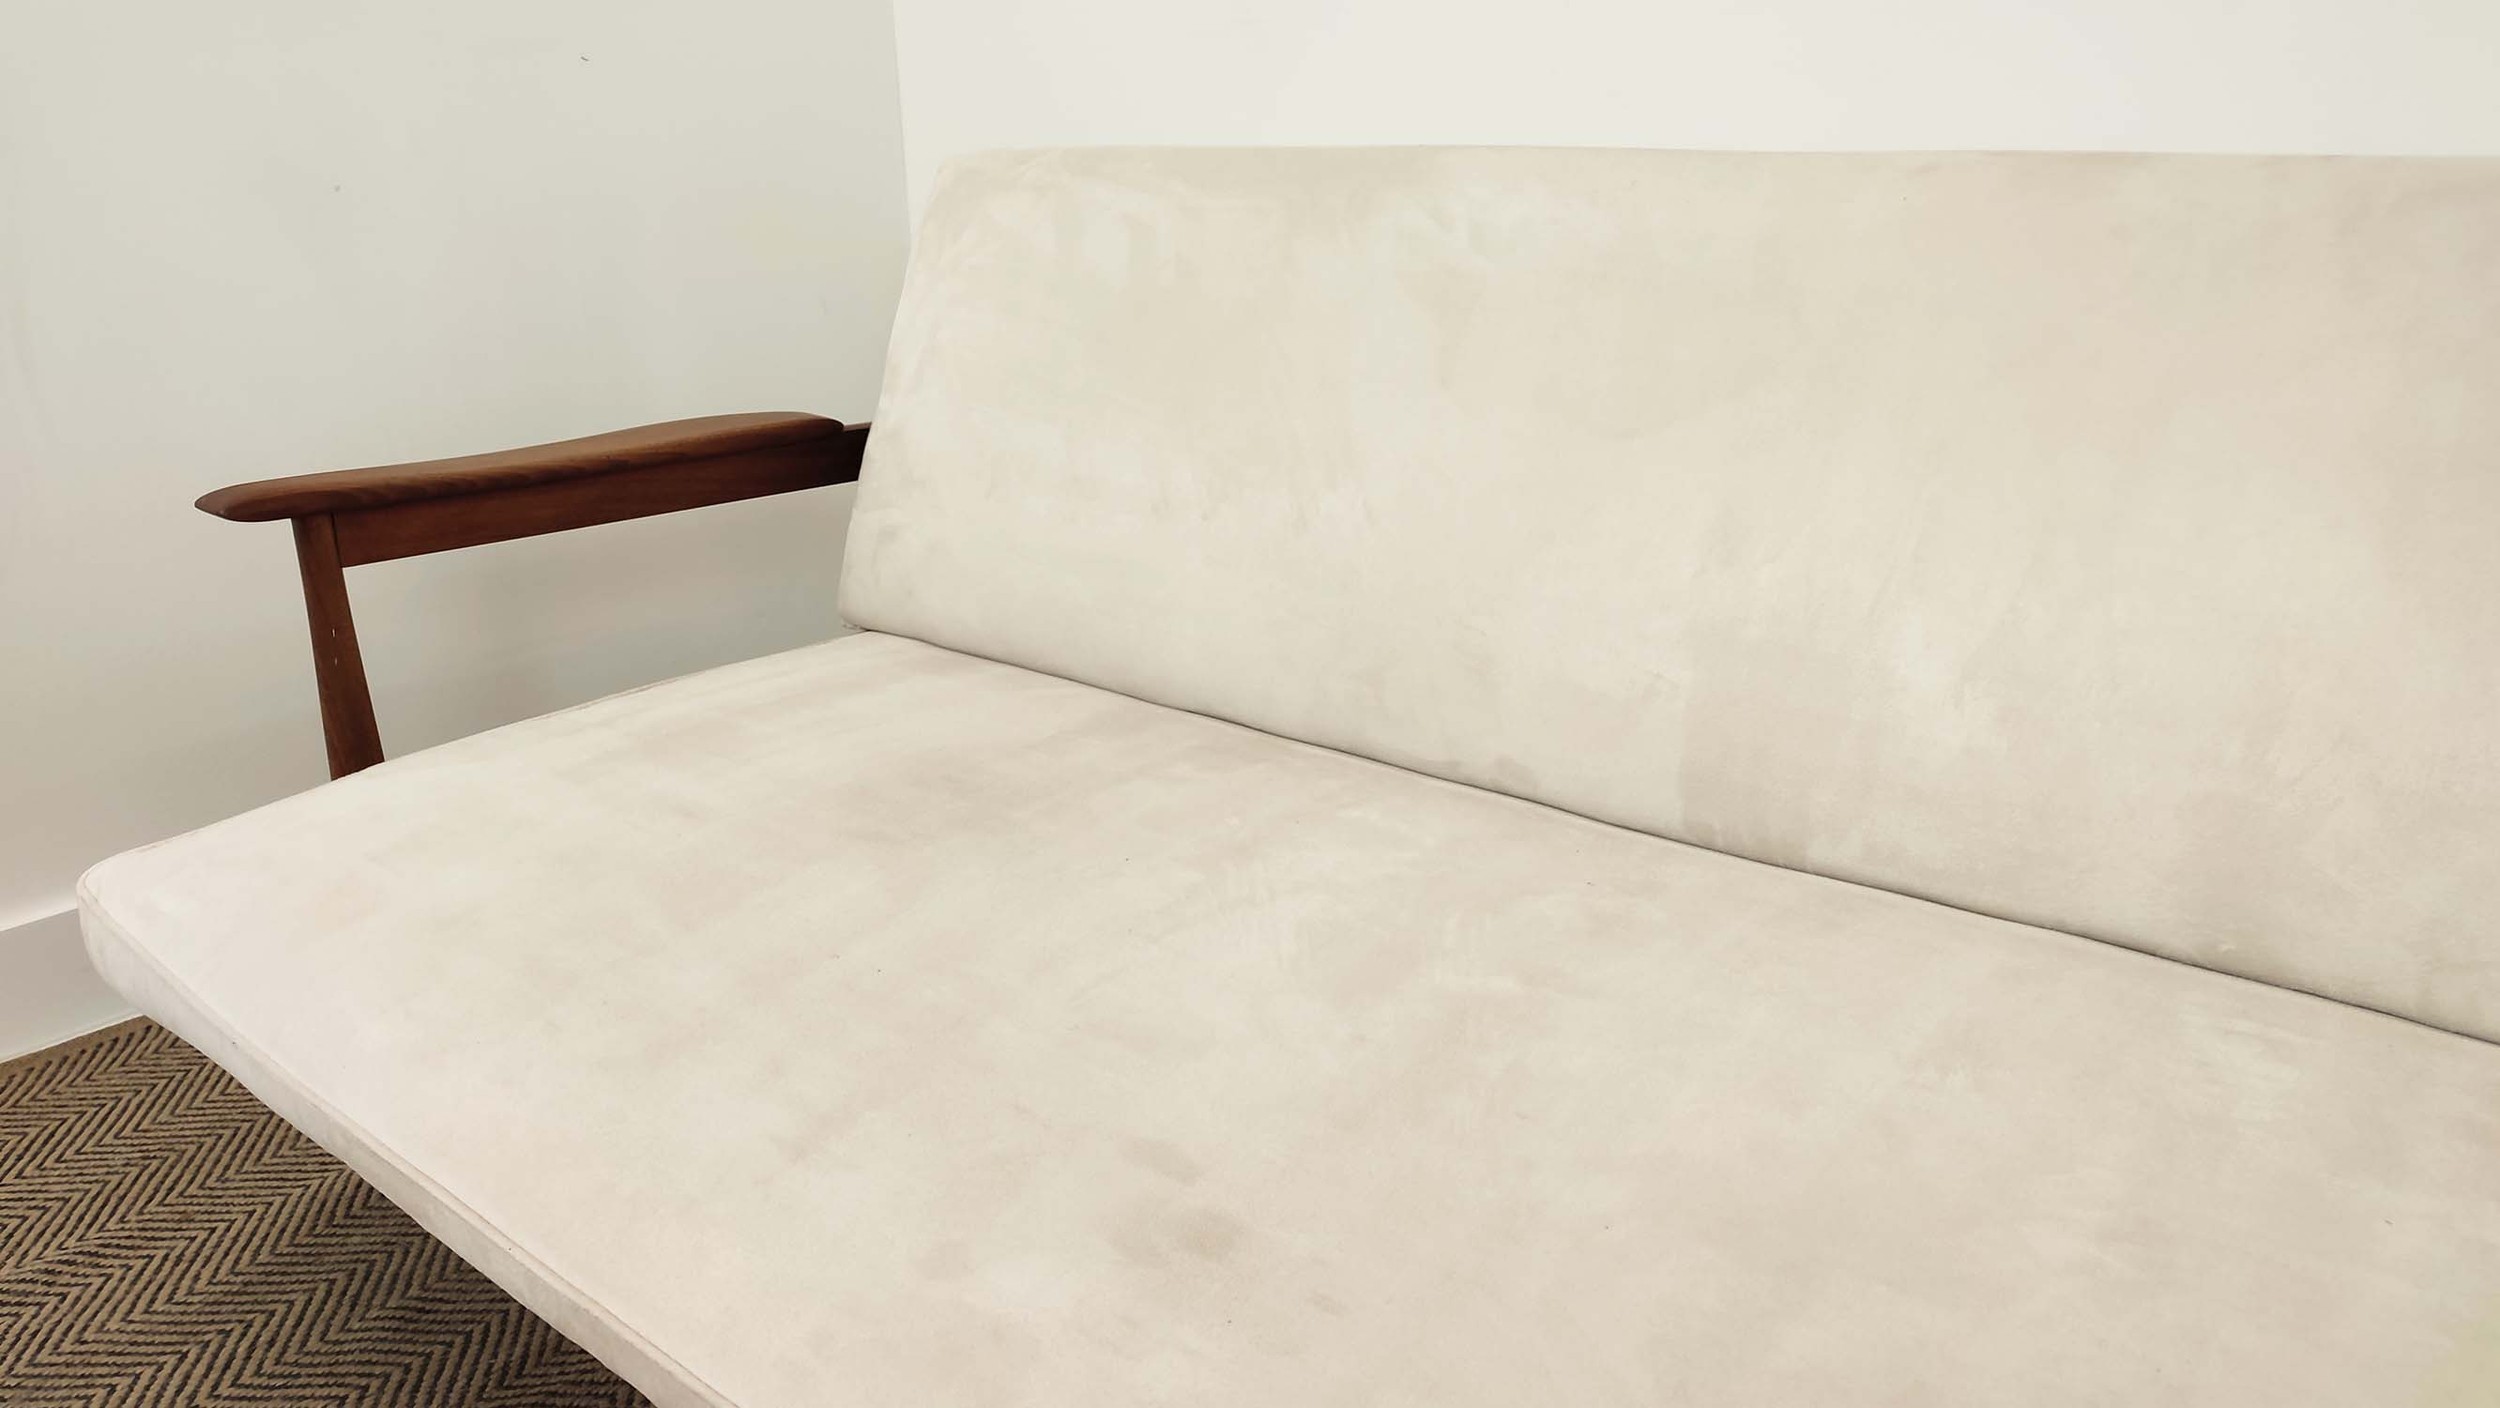 SOFA, vintage 20th century with a tilting back exposing hidden storage, 205cm W x 81cm D. - Image 6 of 9